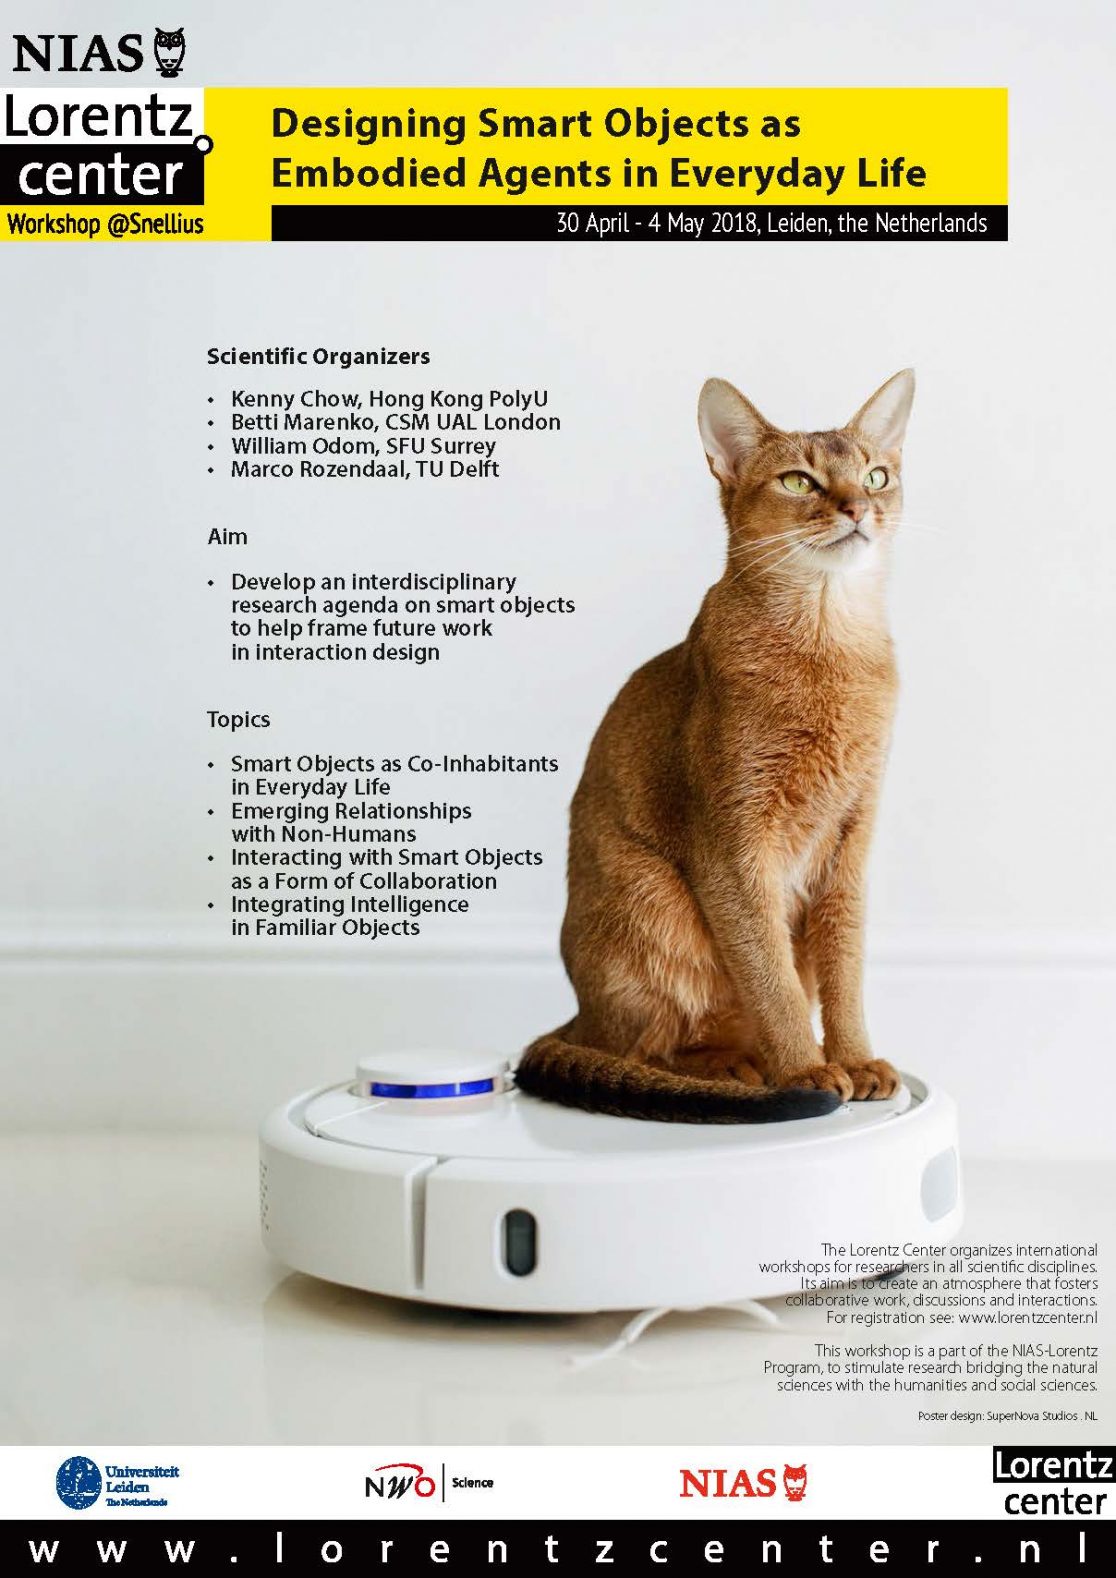 A Cat on a Roomba